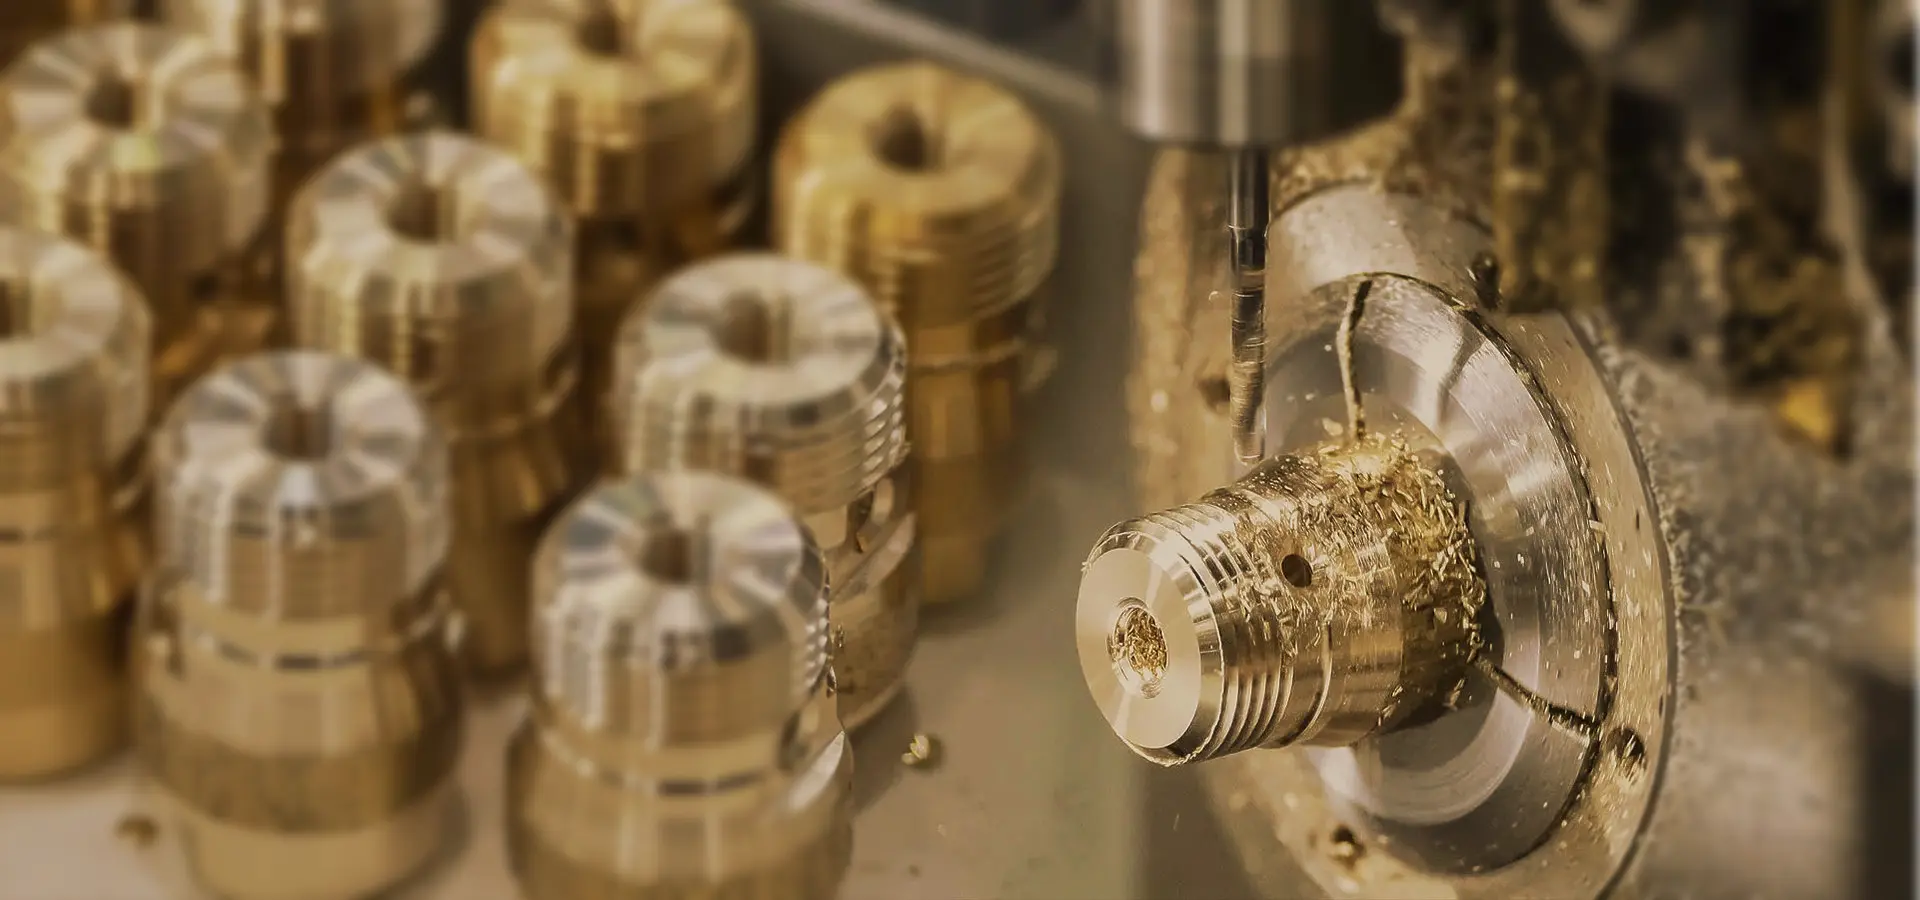 Why Choose HHC for High Precision Manufacturing?